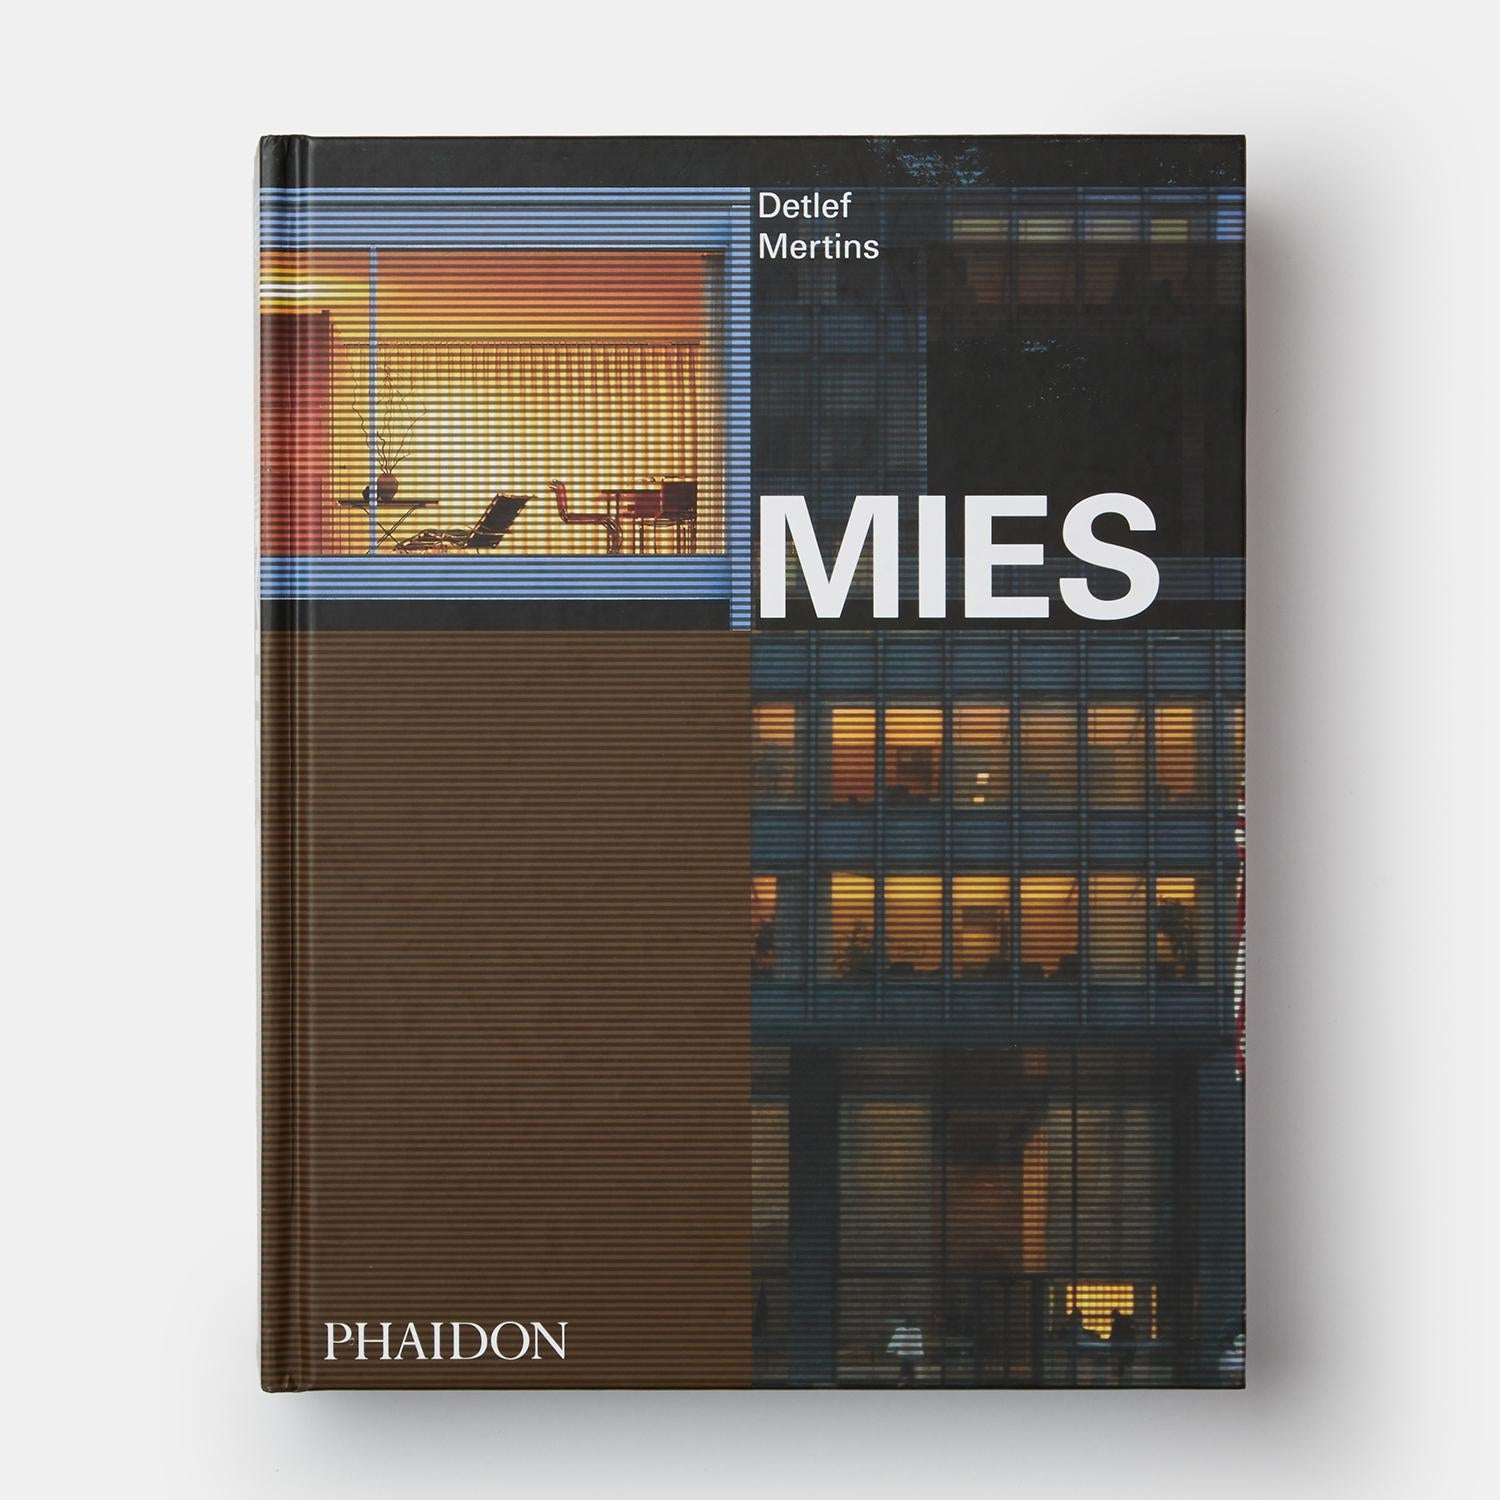 The classic and most definitive monograph ever published on iconic architect Mies van der Rohe - now back in print



This is the most readable, beautiful, and comprehensive book ever published on one of the twentieth century's most influential